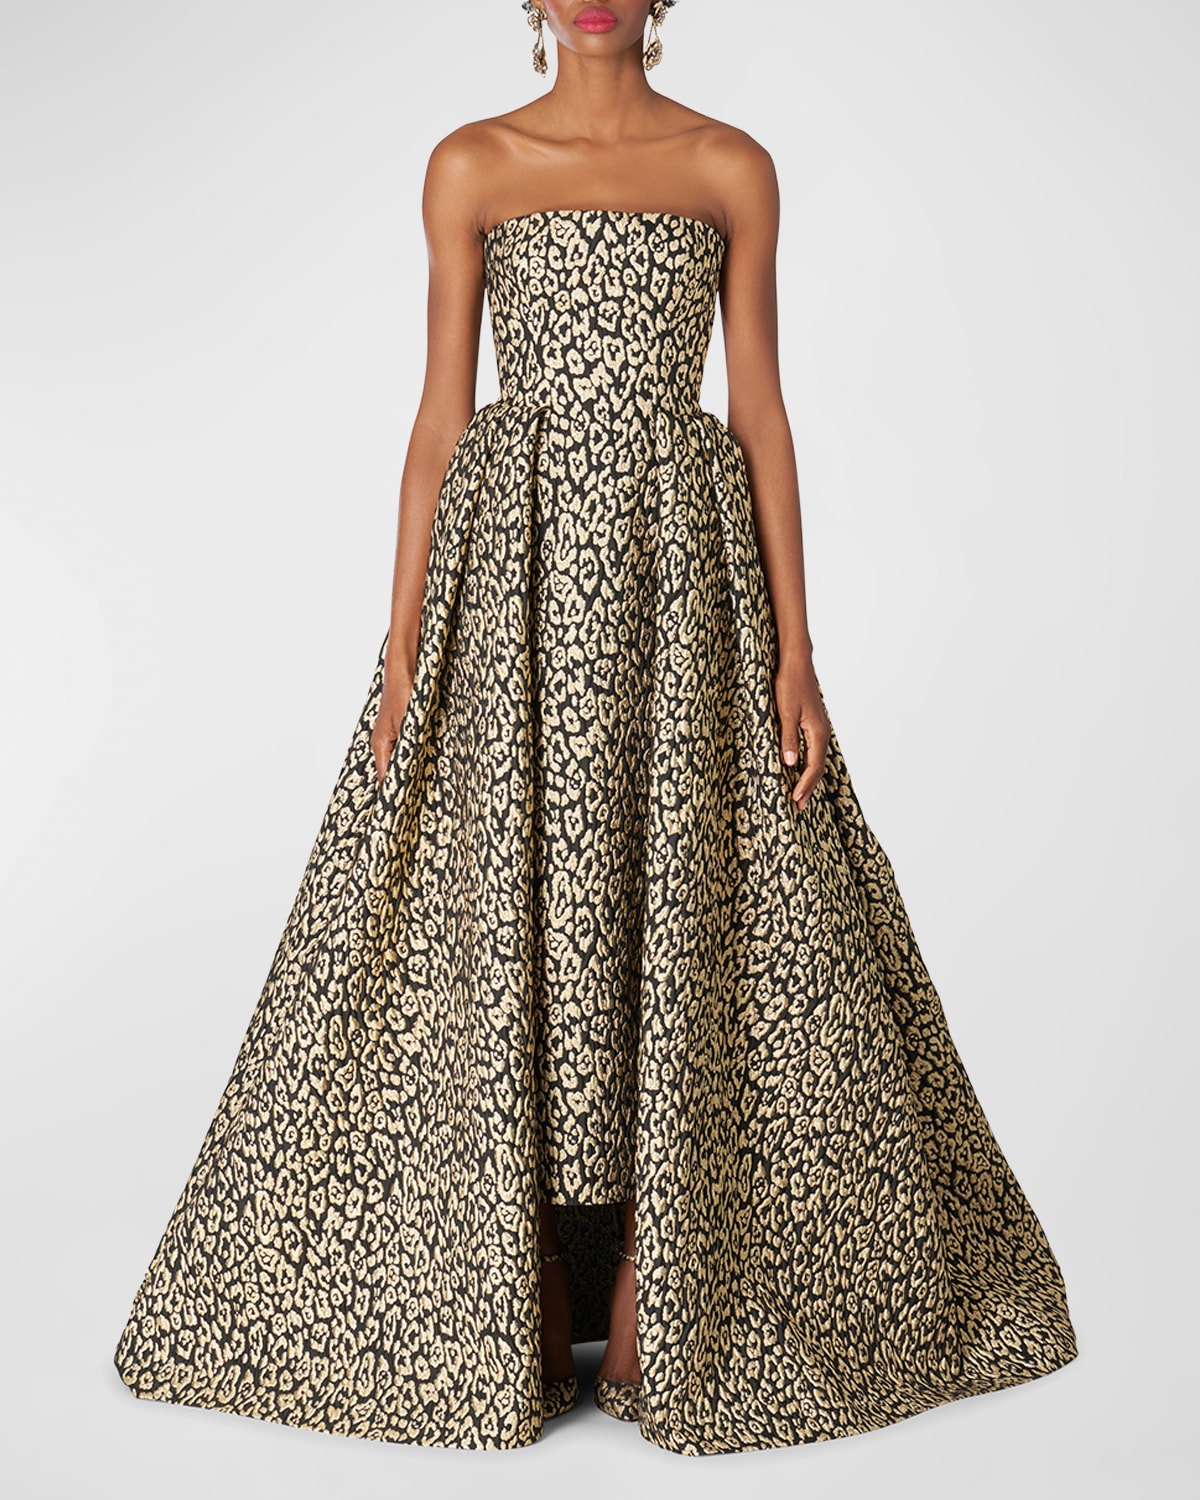 CAROLINA HERRERA LEOPARD-JACQUARD STRAPLESS COLUMN GOWN WITH ATTACHED OVERSKIRT